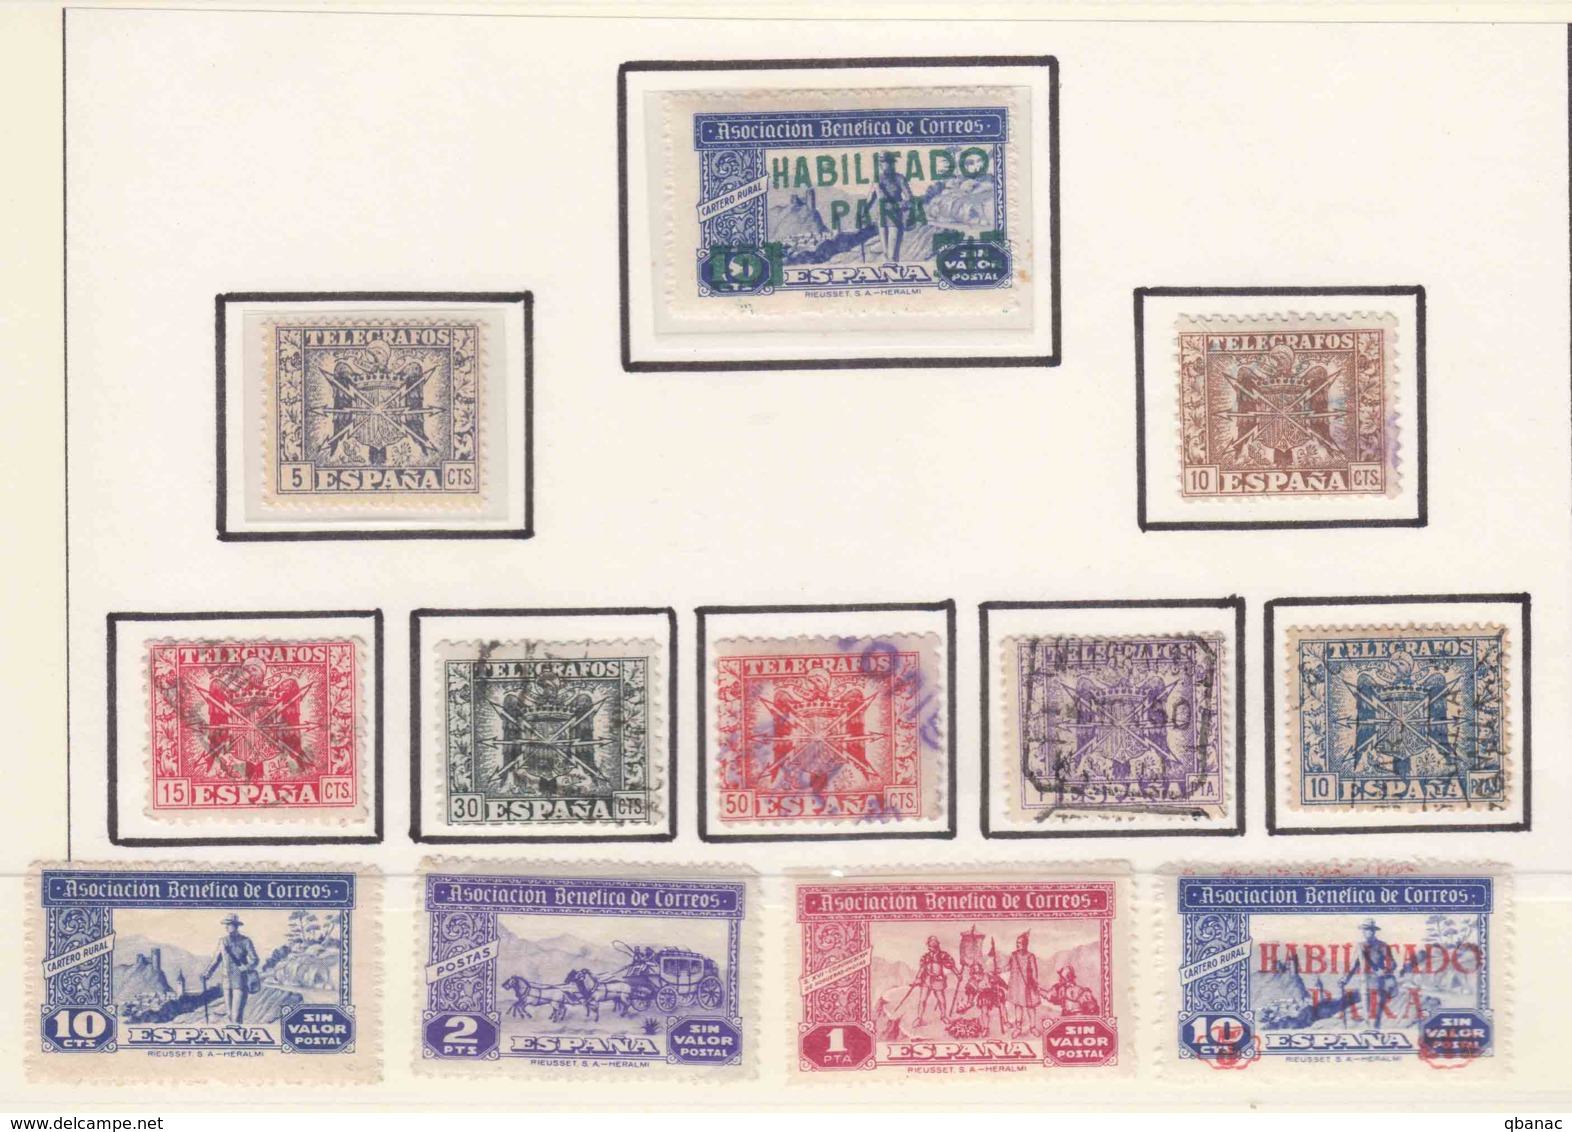 Spain Telegrafos And Other Stamps Lot - Telegraph